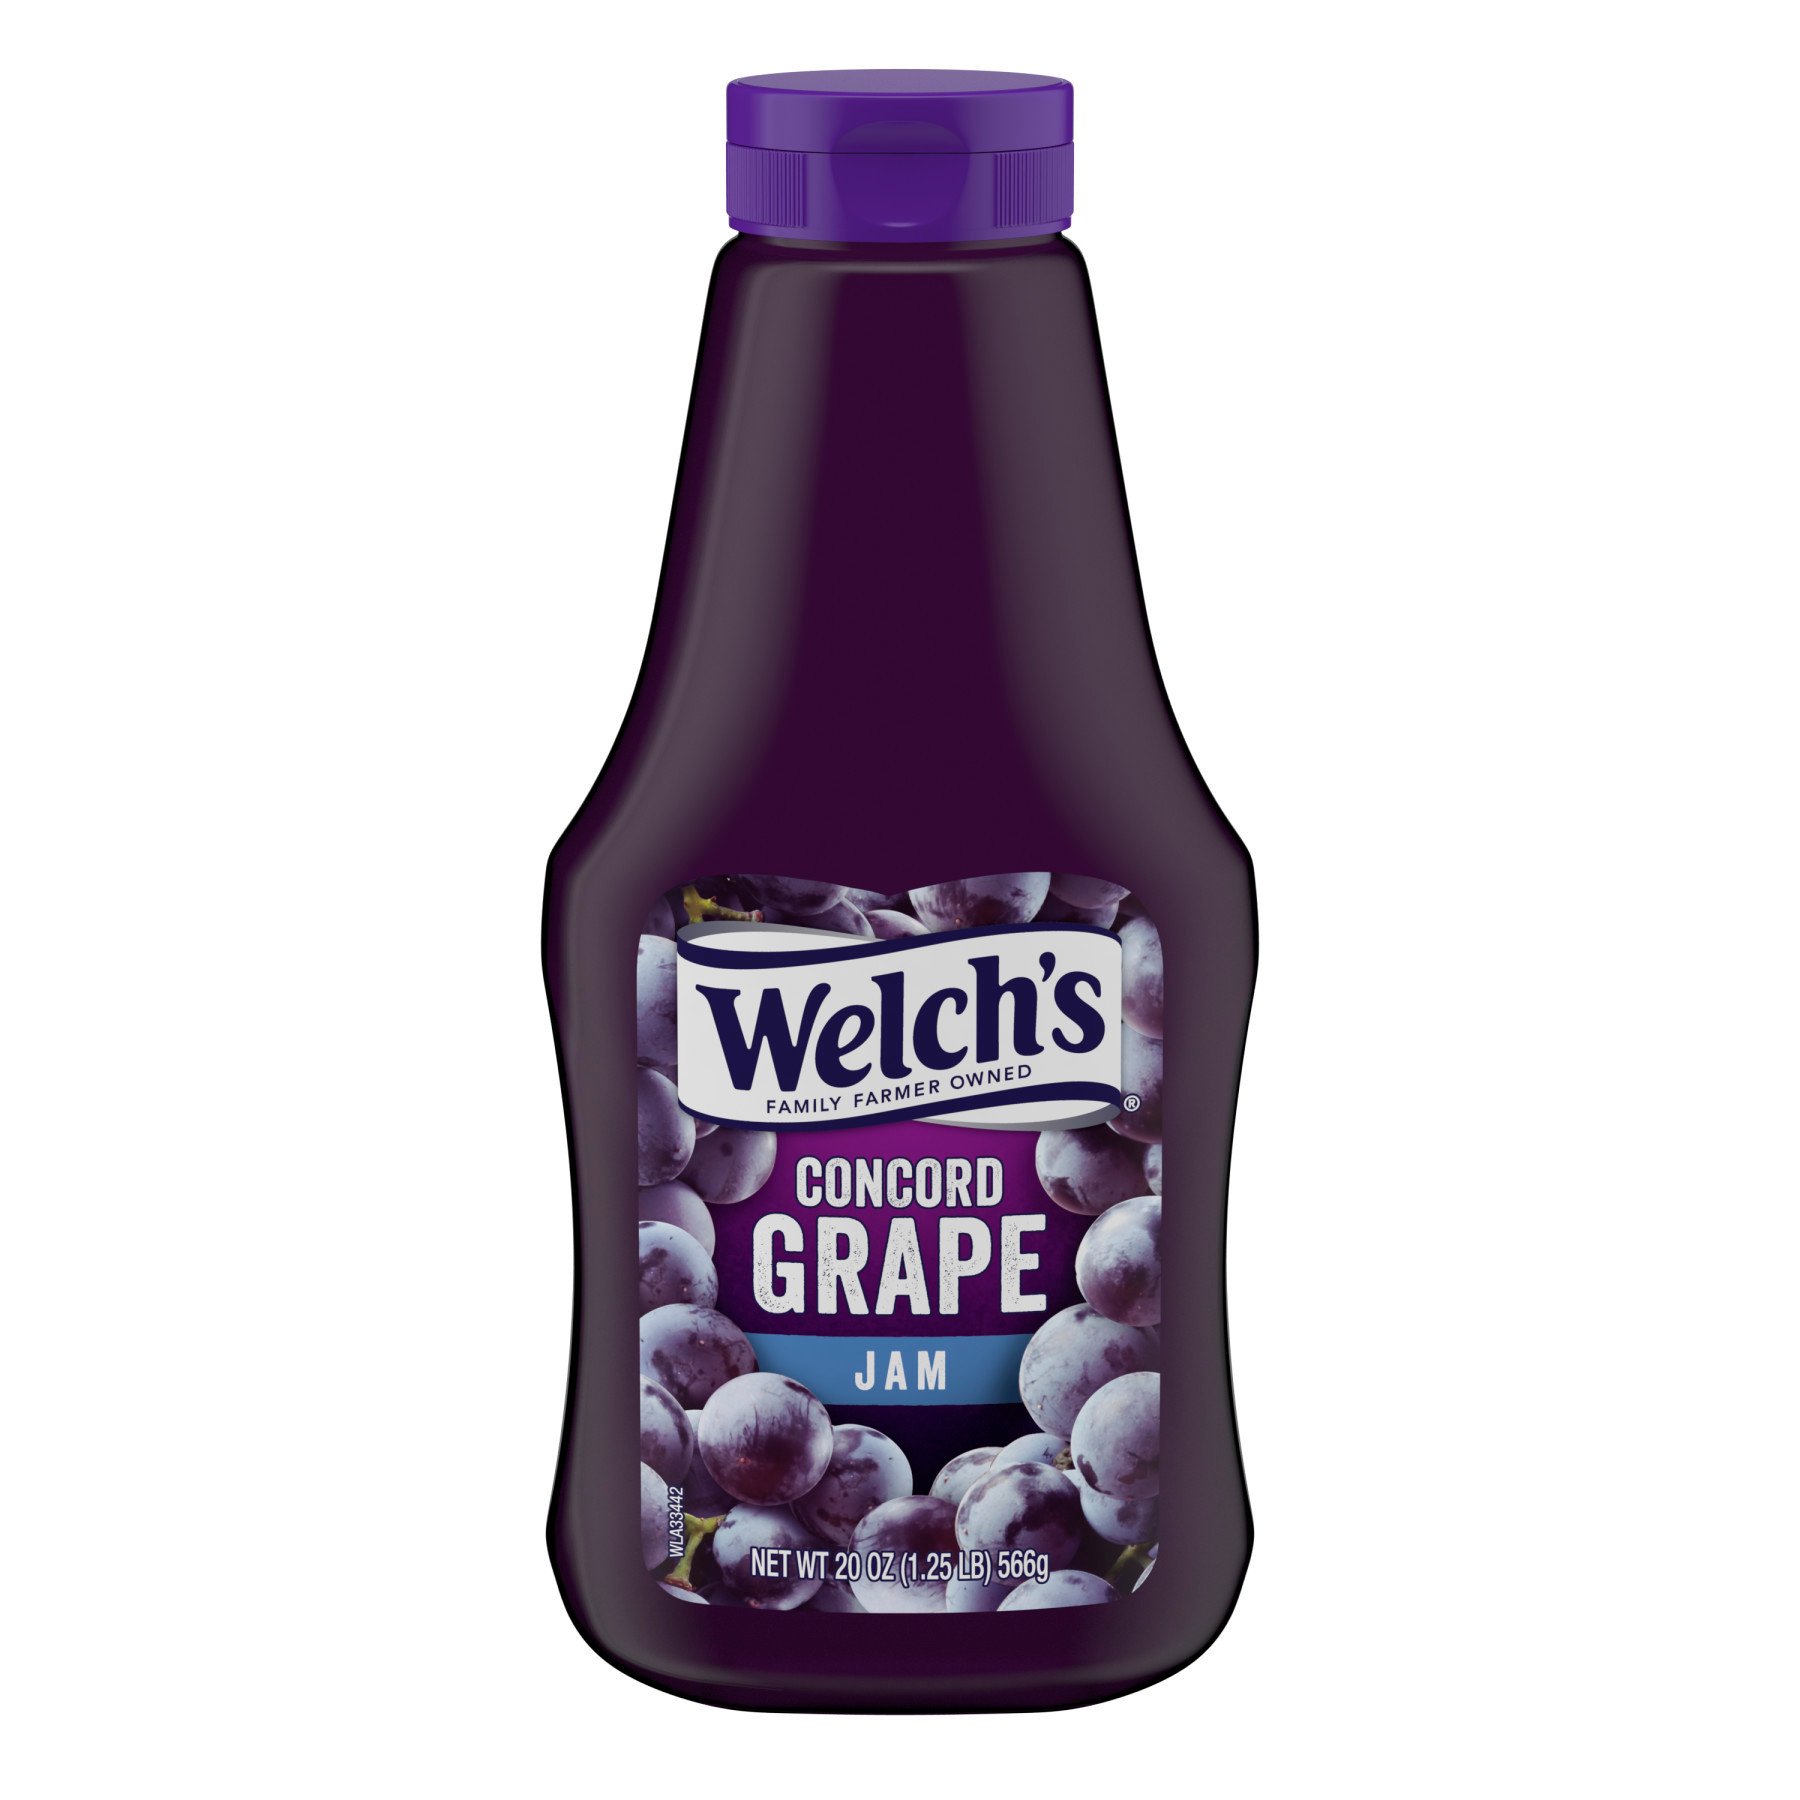 Welch's Concord Grape Jam - Shop Jelly & Jam at H-E-B